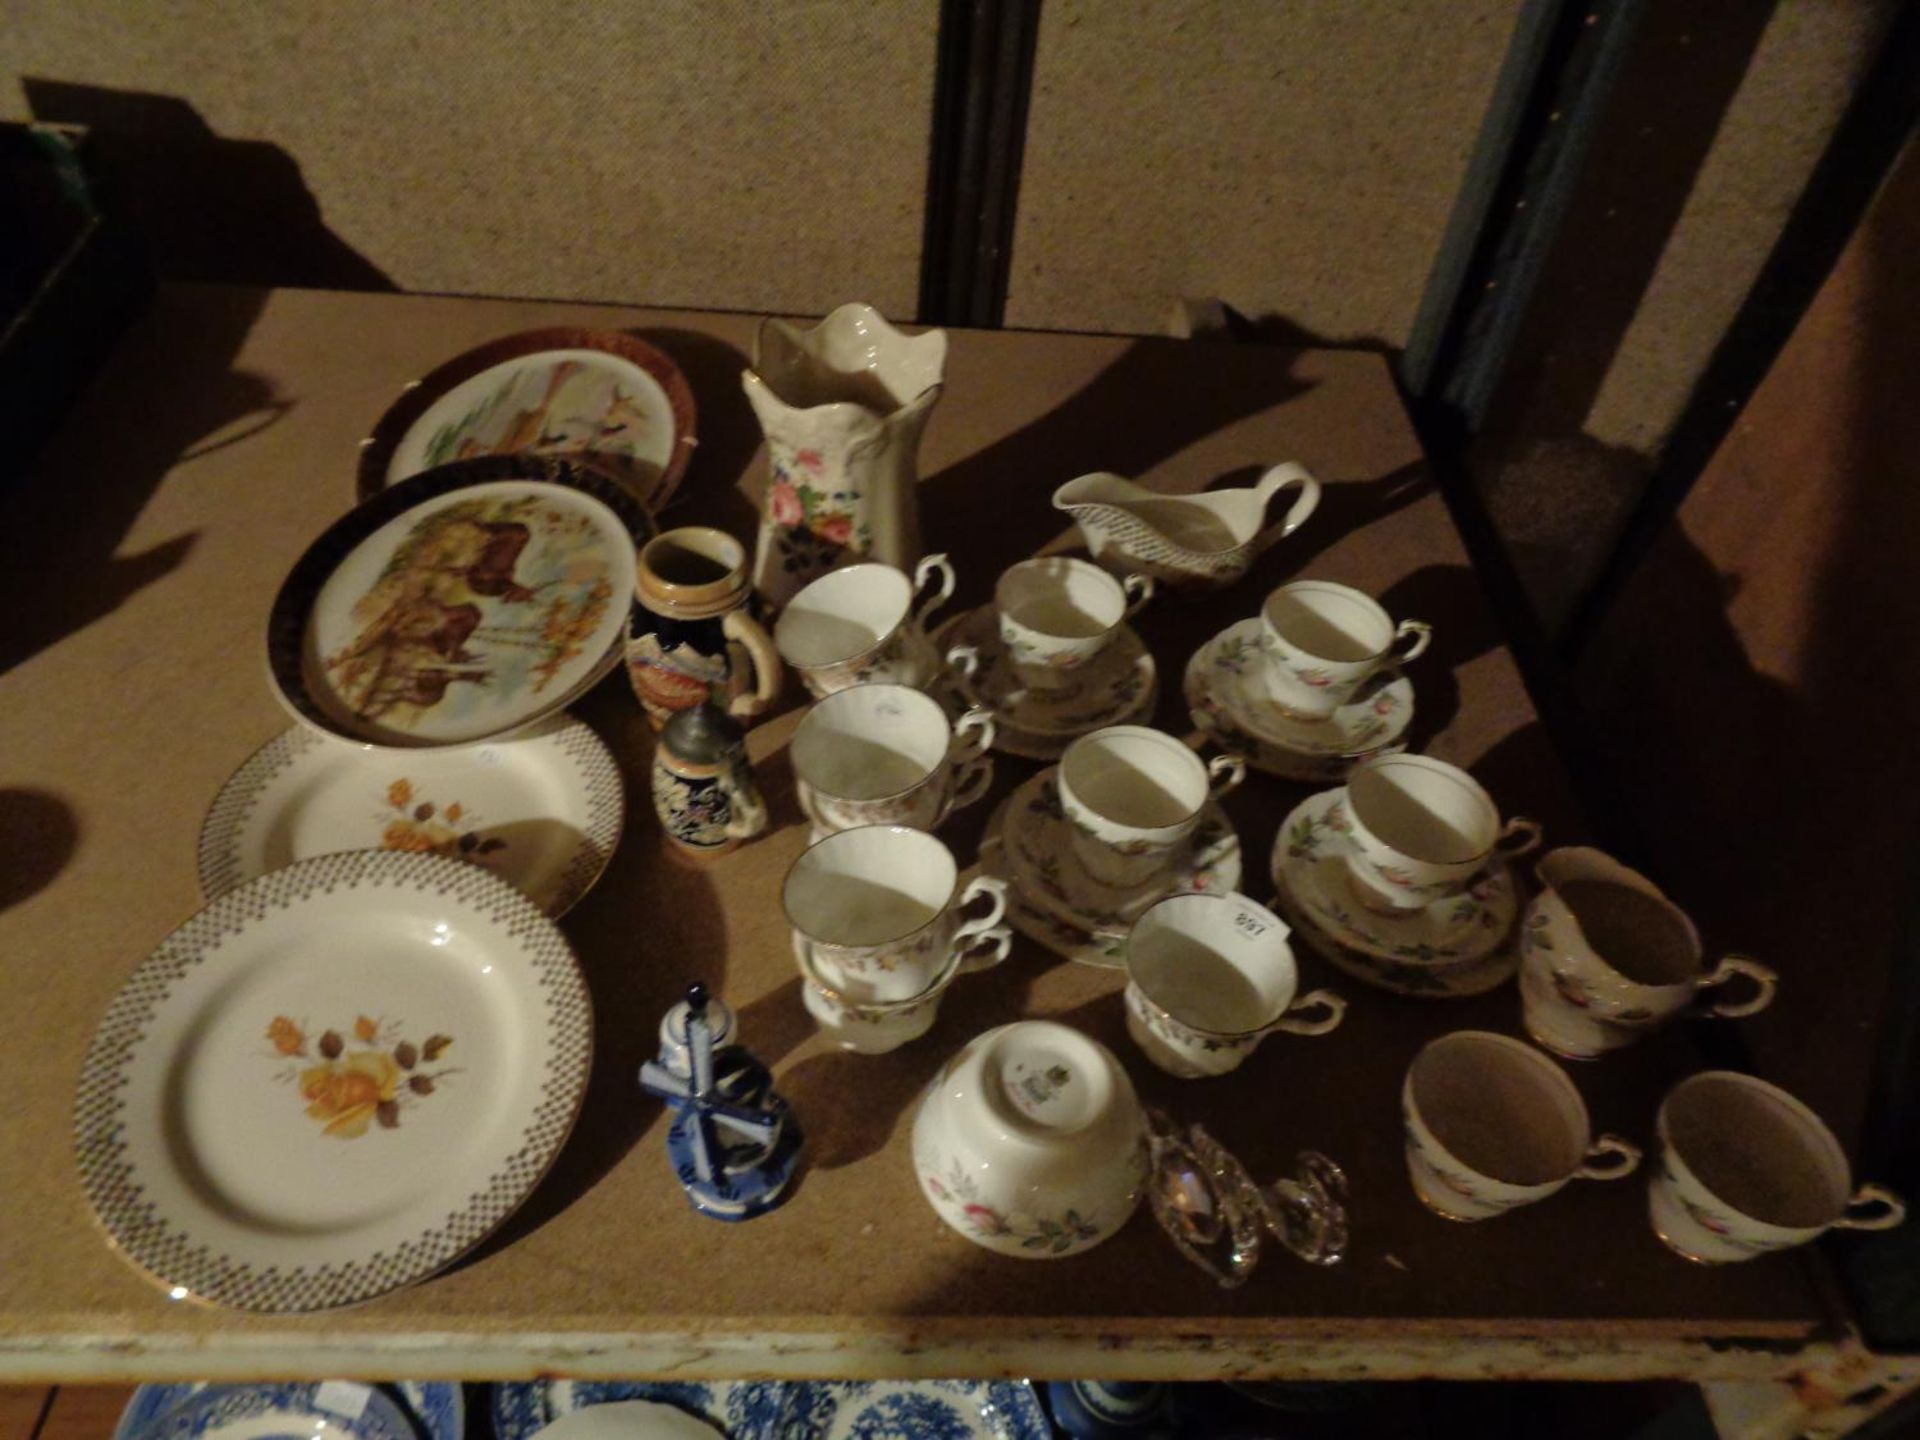 A SELECTION OF CHINA TEA WARE PARAGON 'BRIDAL ROSE', DECORATIVE PLATES, BLUE AND WHITE ETC